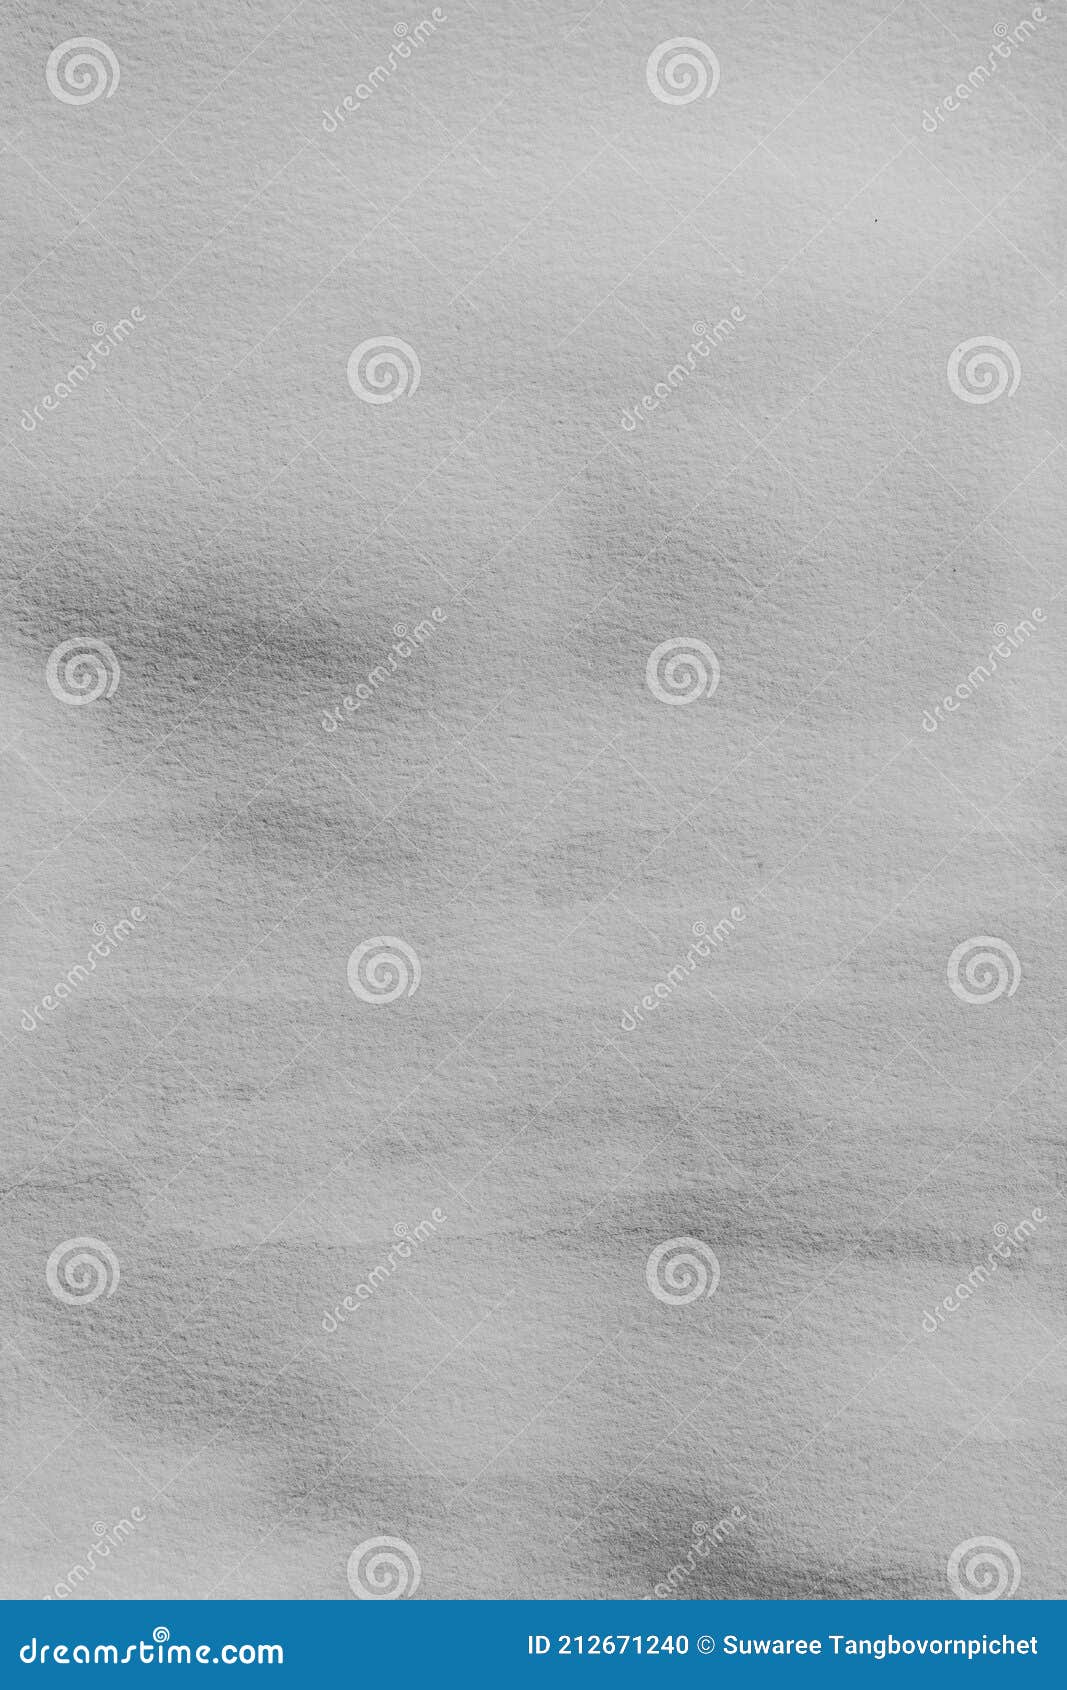 Abstract Black and White Watercolor on Paper Texture Wallpaper Stock ...